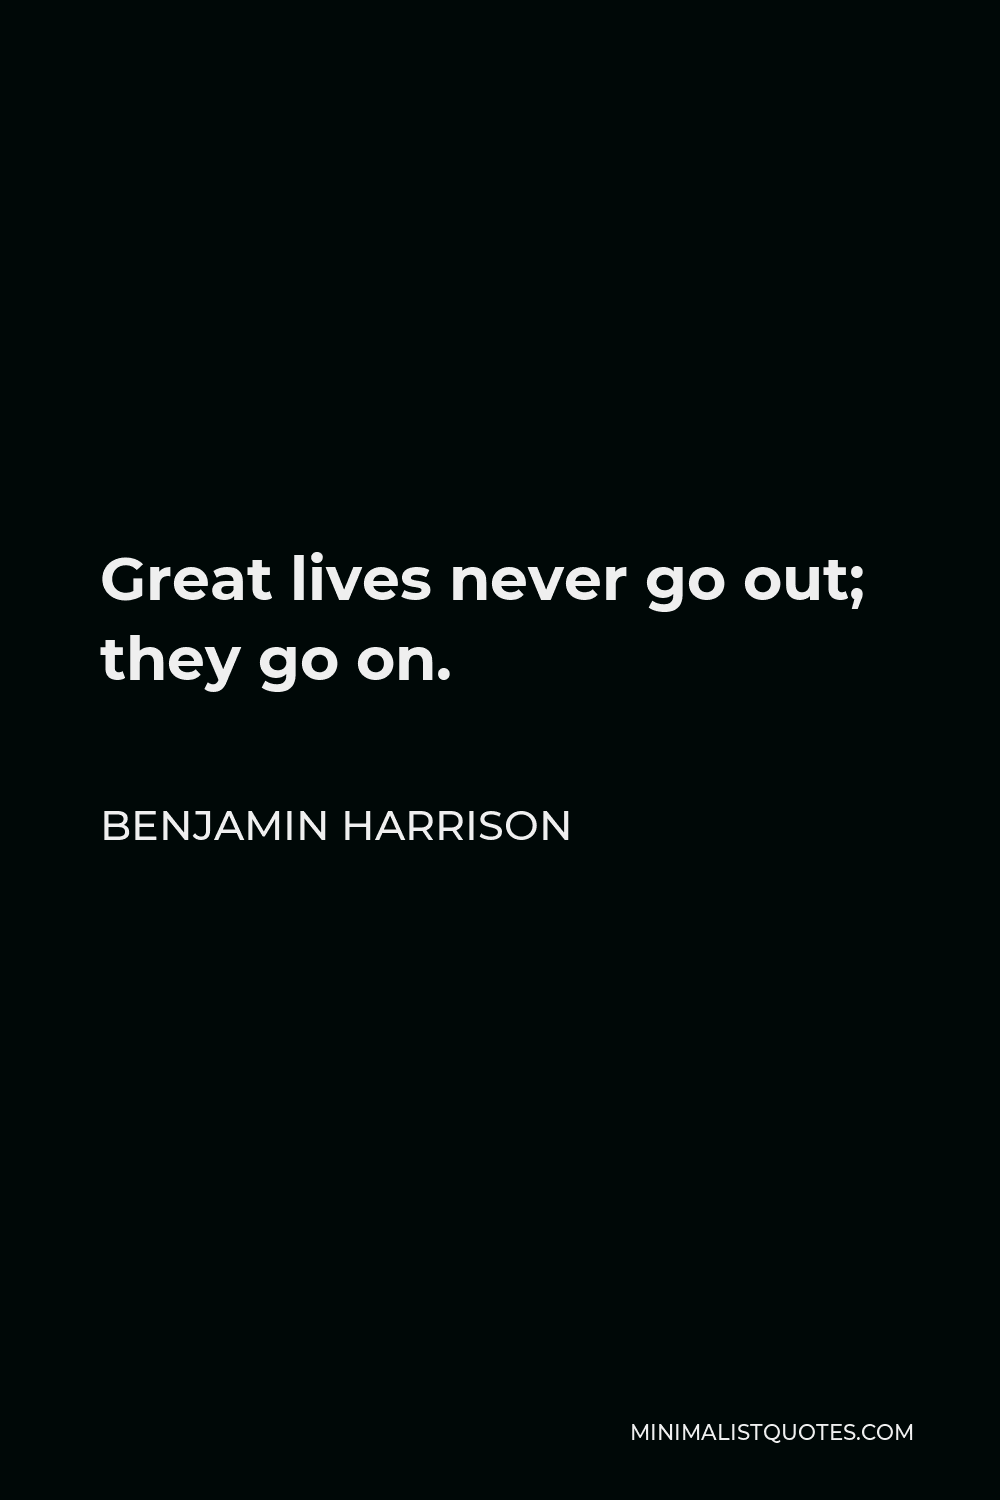 Benjamin Harrison Quote - Great lives never go out; they go on.